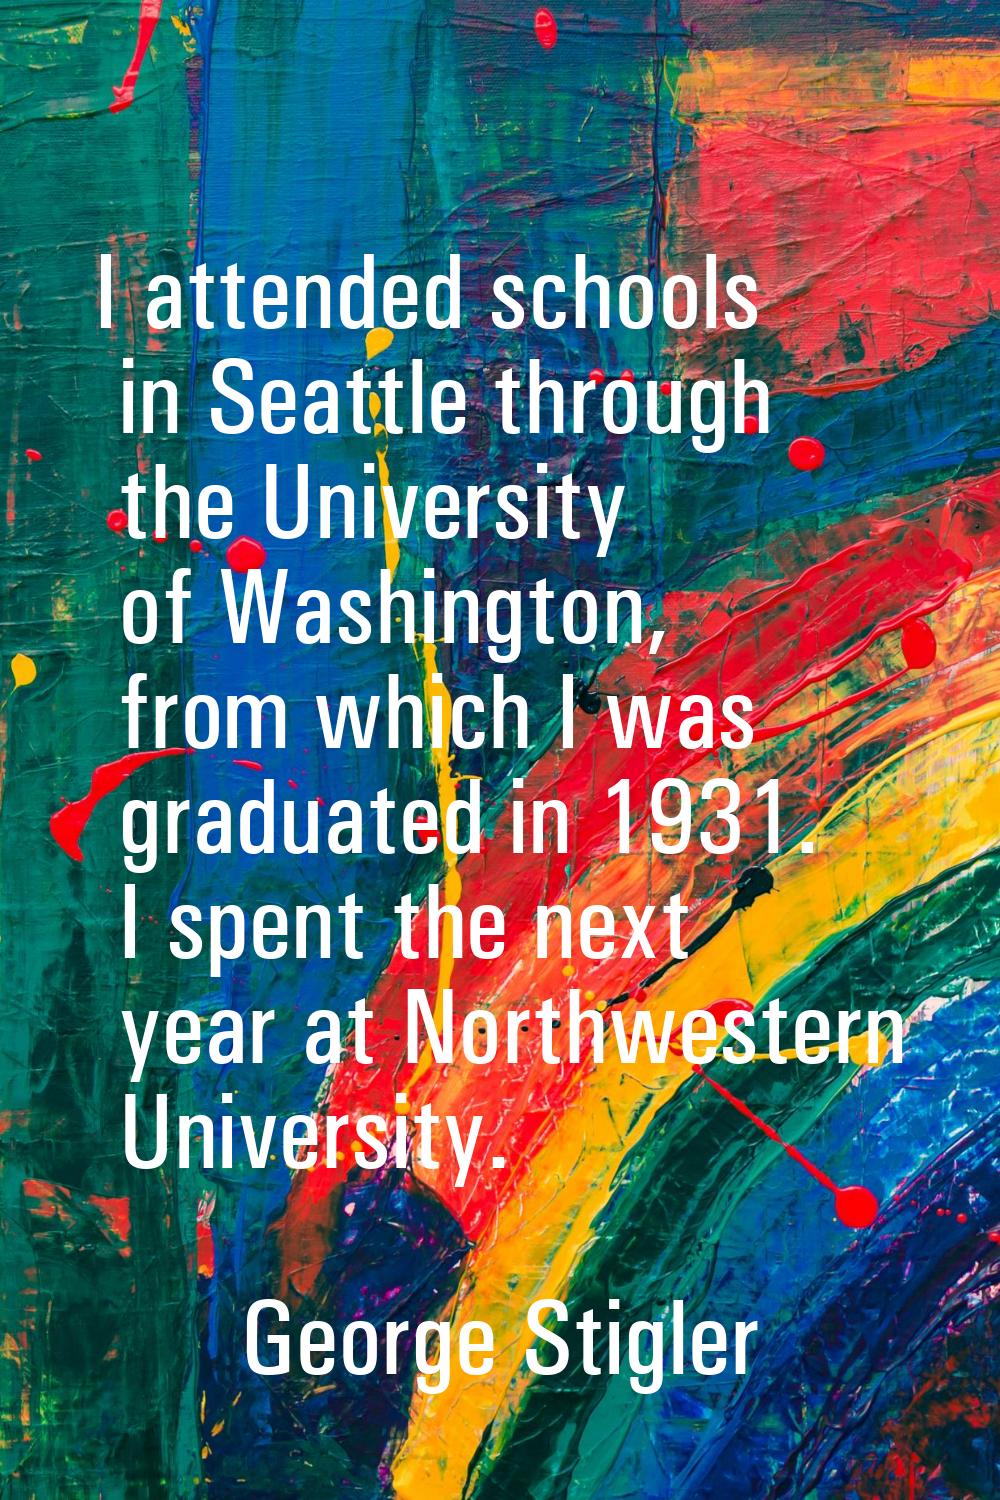 I attended schools in Seattle through the University of Washington, from which I was graduated in 1